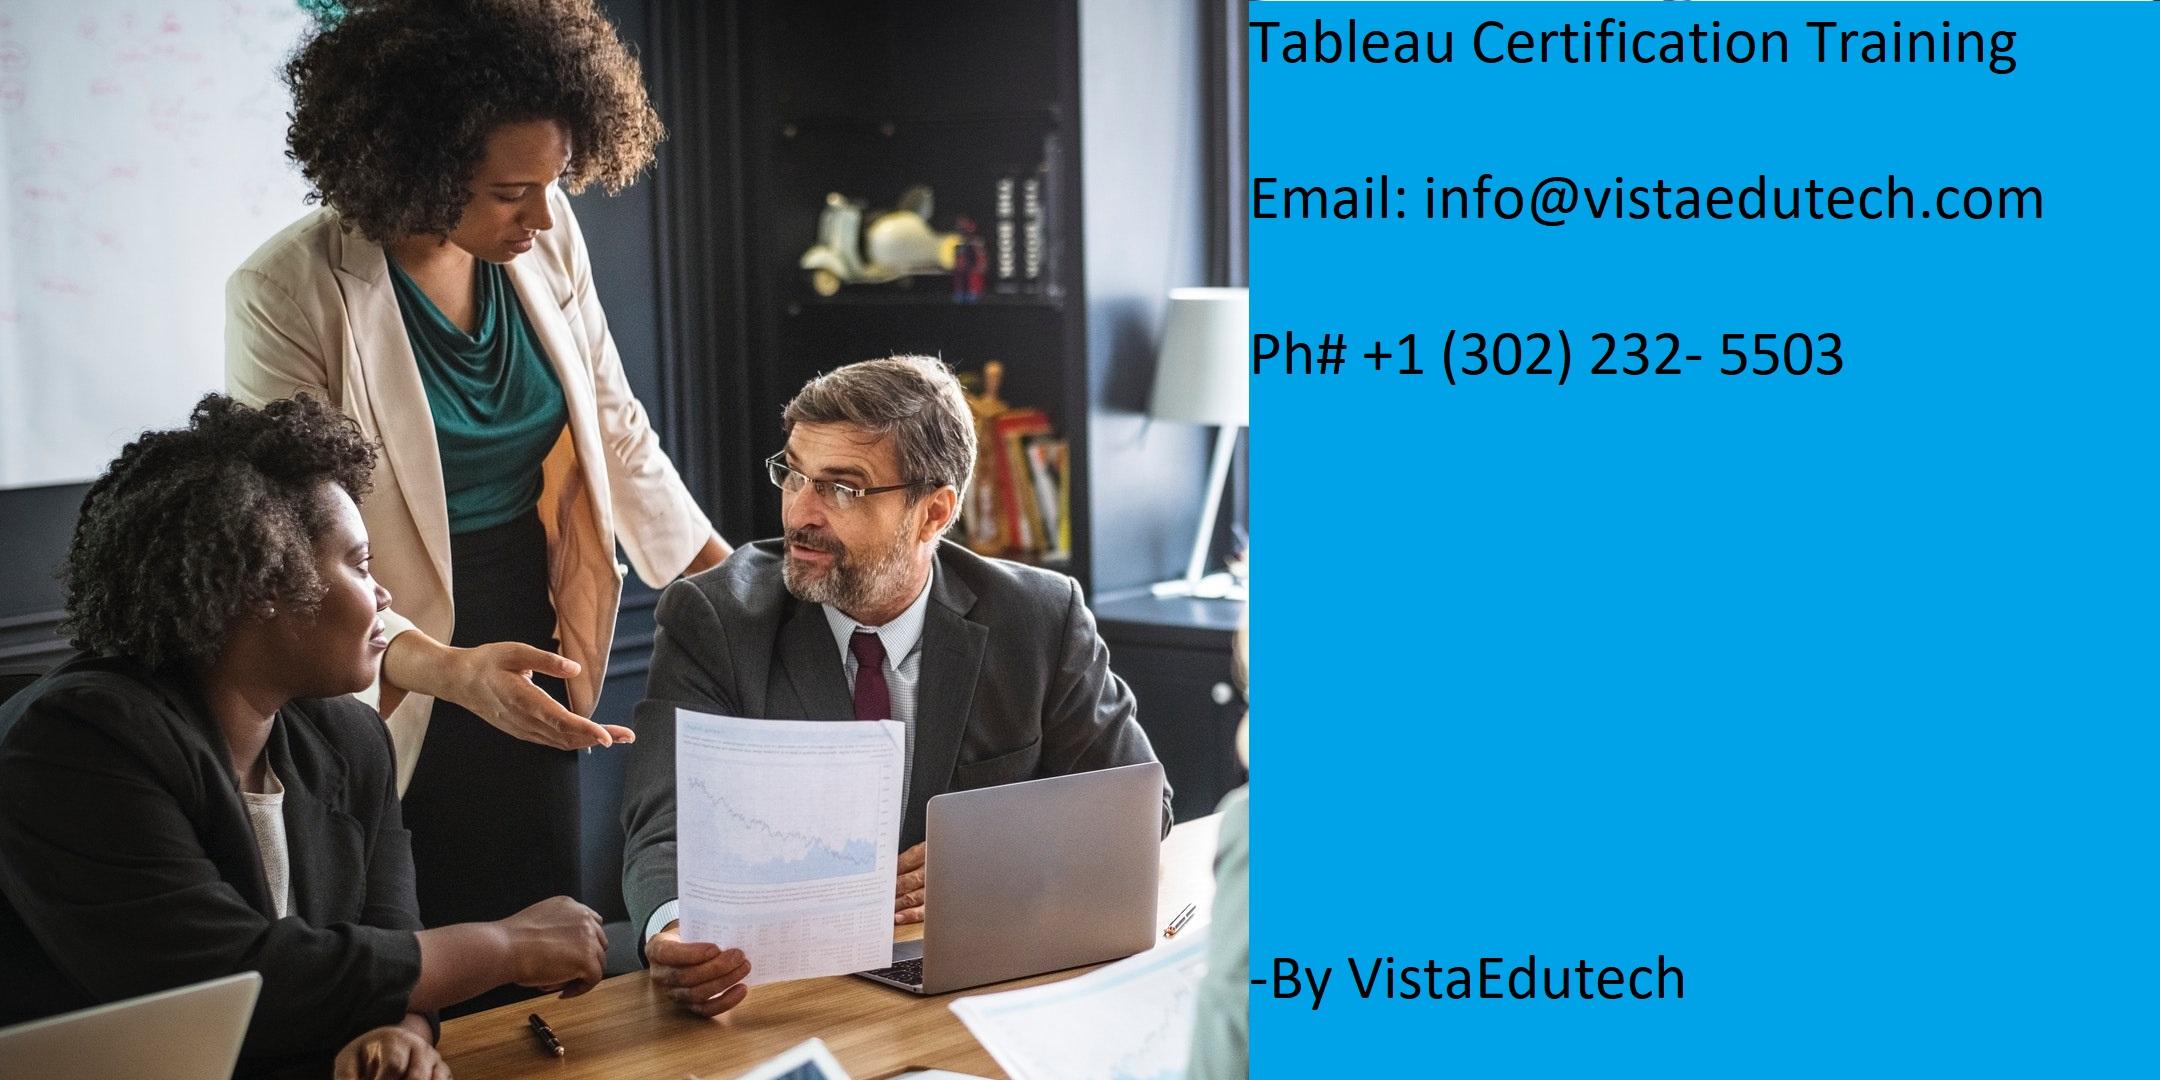 Tableau Certification Training in Corvallis, OR